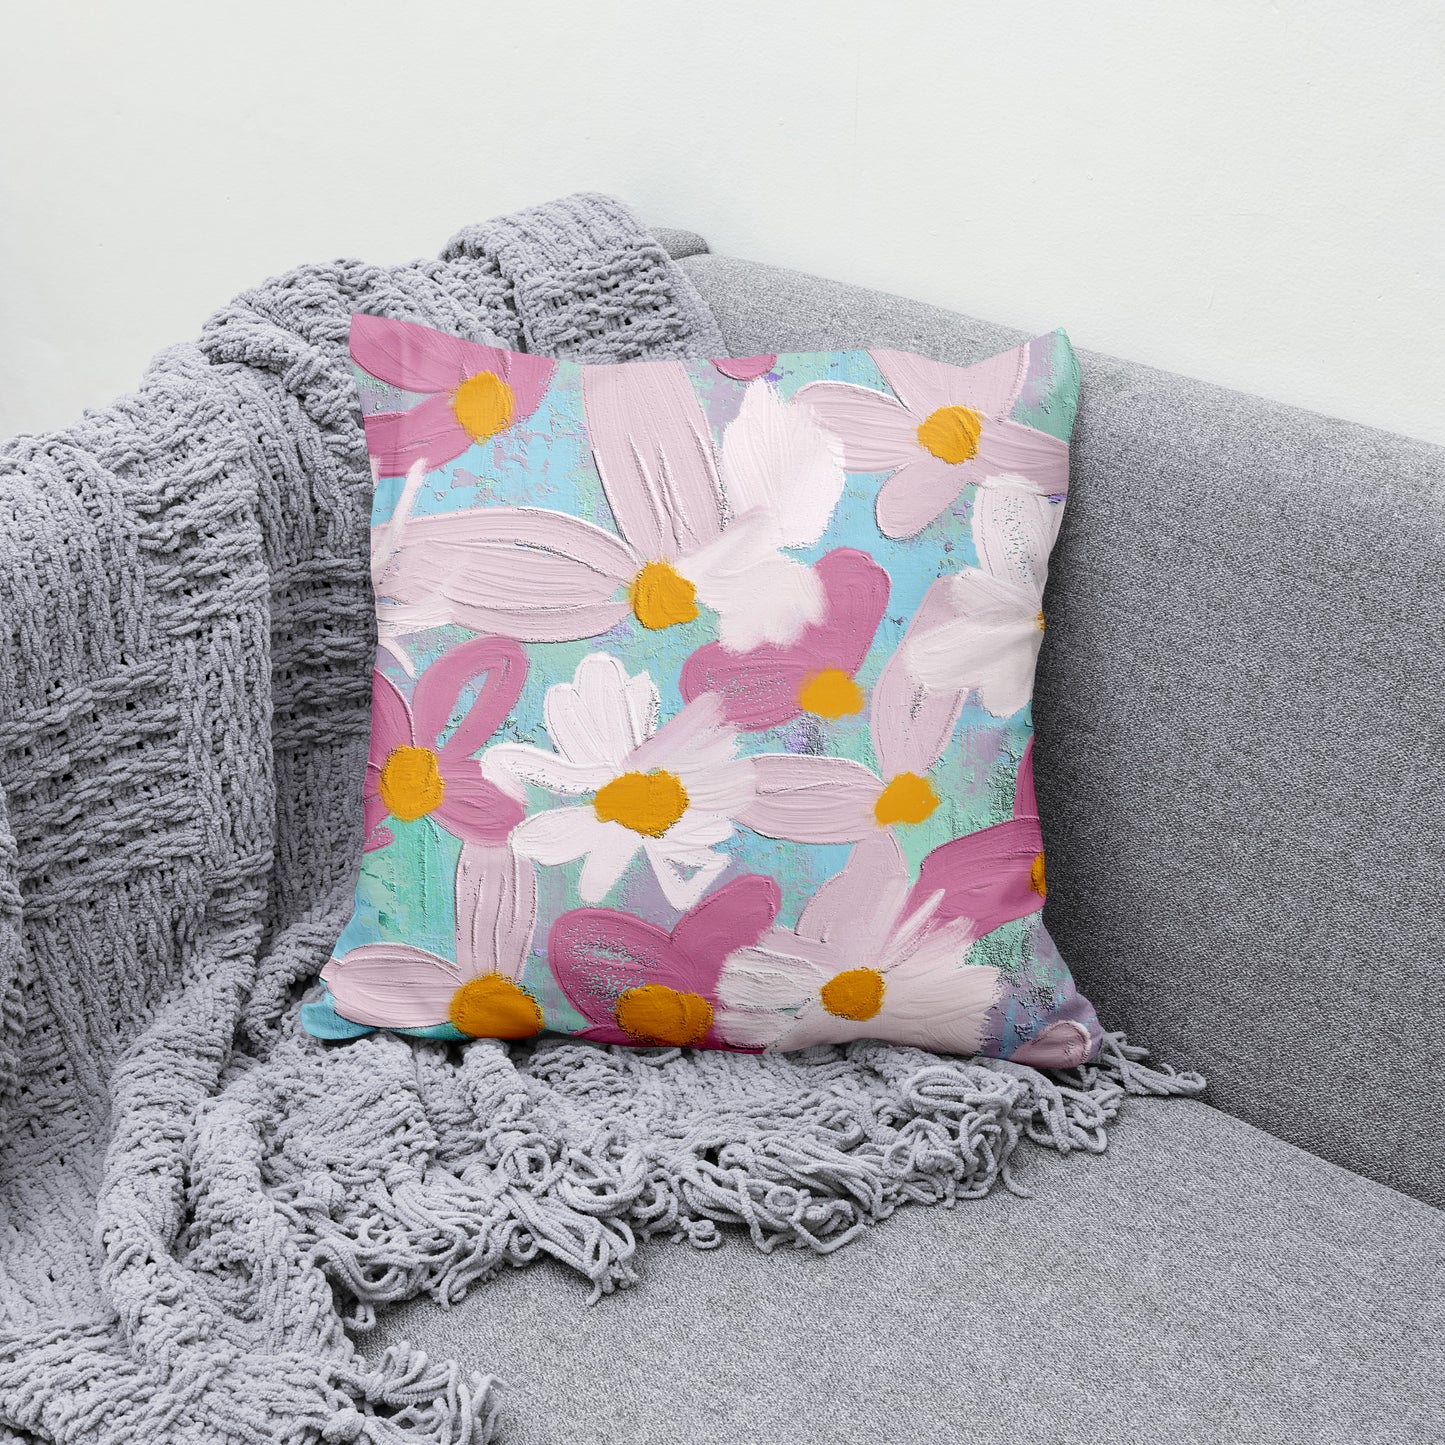 Pillow with Painted Floral Pattern